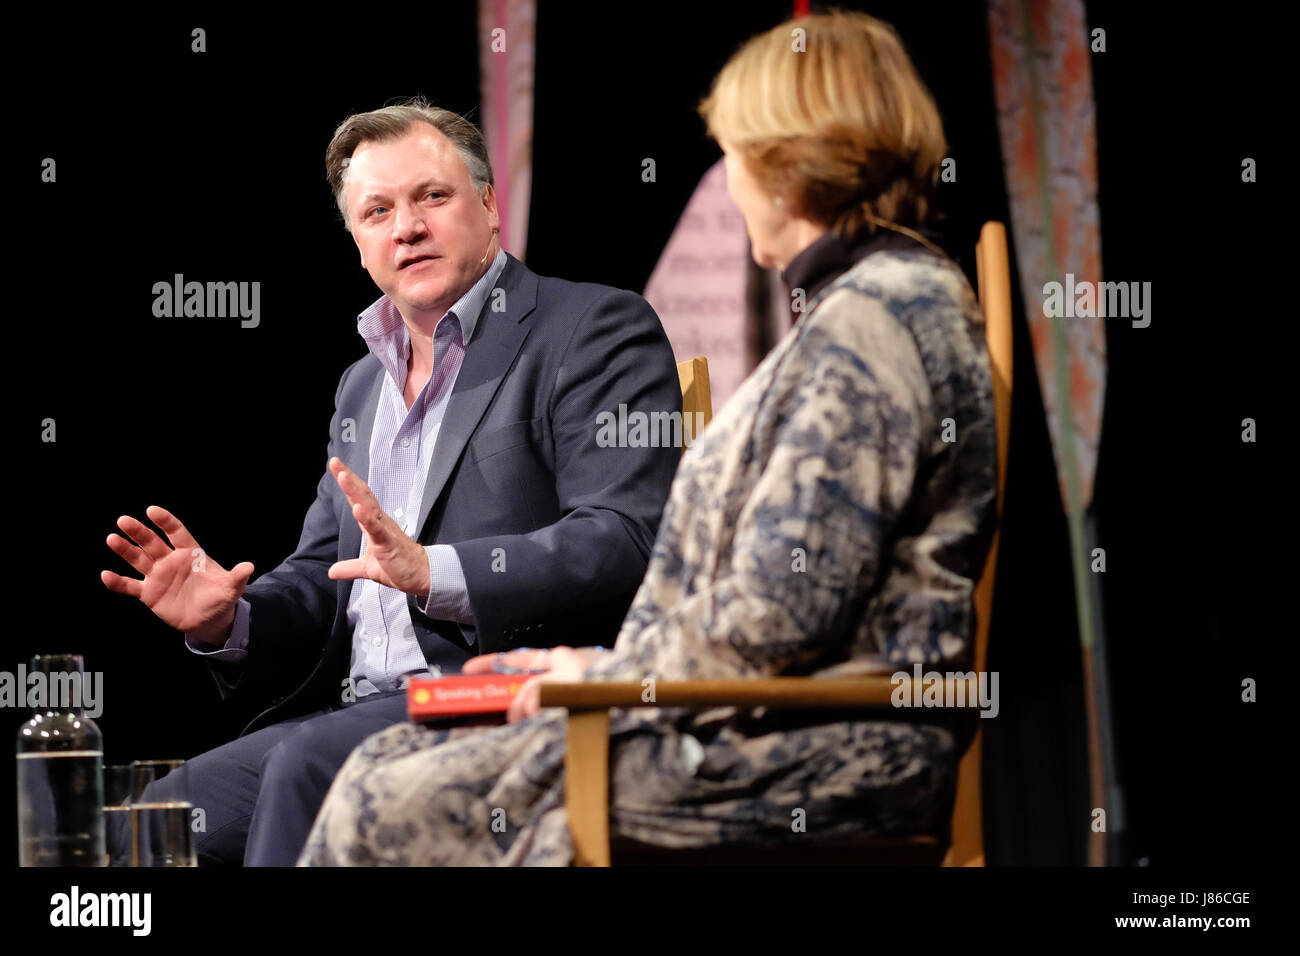 Hay Festival 2017 - Hay on Wye, Wales, UK - Saturday 27th May 2017 - Former politician Ed Balls on stage talking with Joan Bakewell at the Hay Festival - the Hay Festival celebrates its 30th anniversary in 2017 - the literary festival runs until Sunday June 4th.  Steven May / Alamy Live News Stock Photo